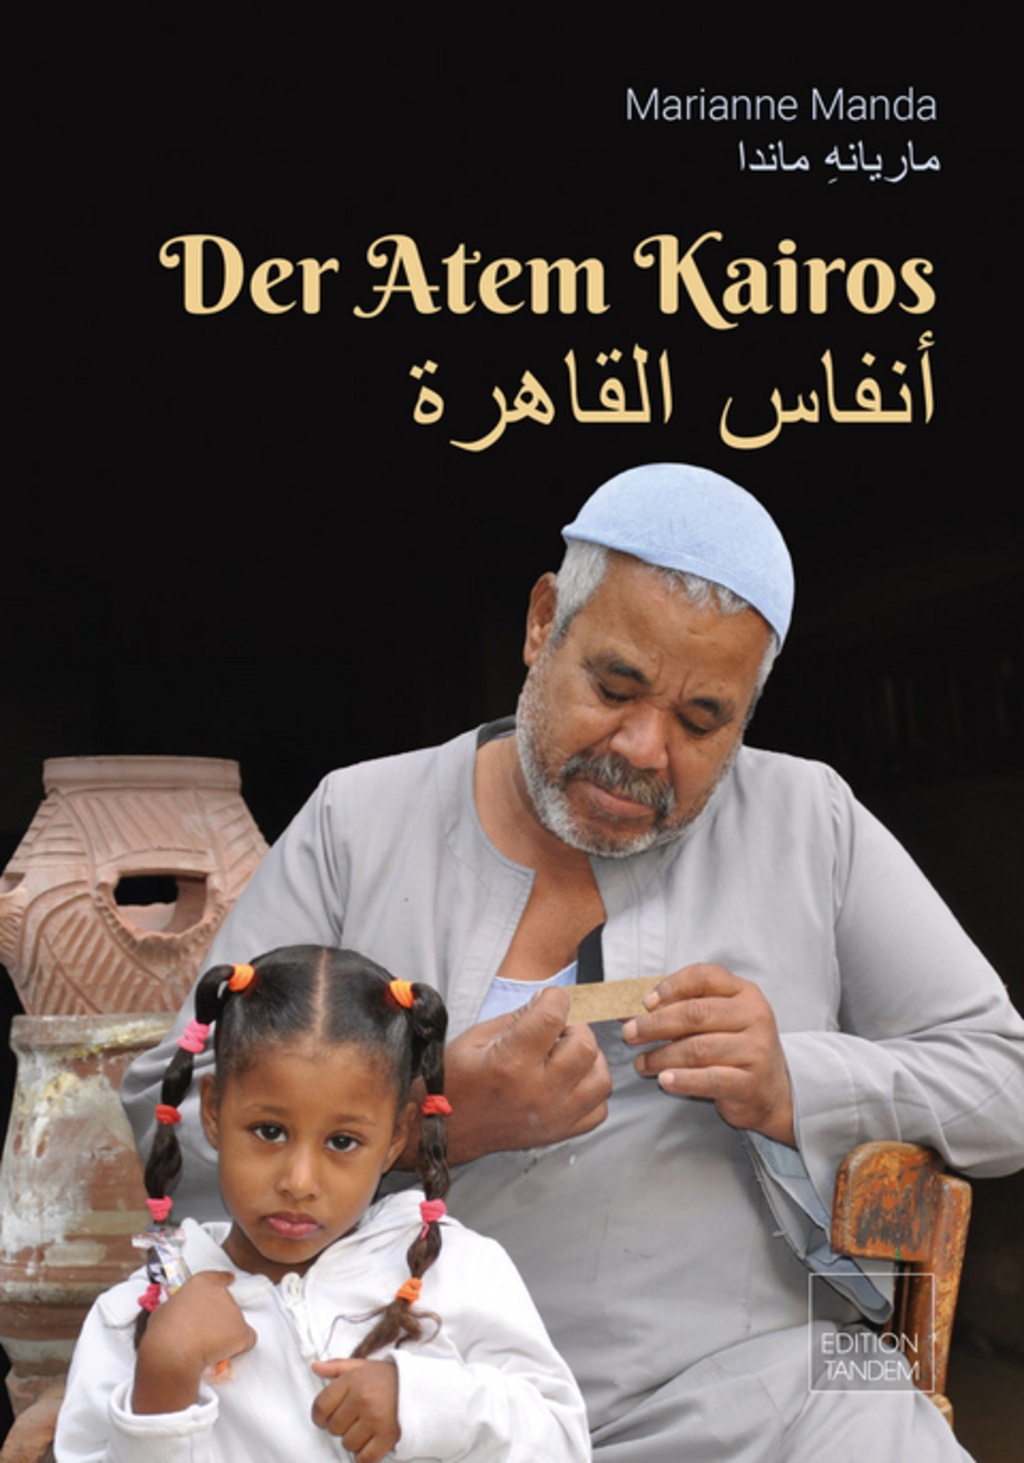 Cover of Marianne Manda's "Der Atem Kairos" (published in German and Arabic by Edition Tandem)